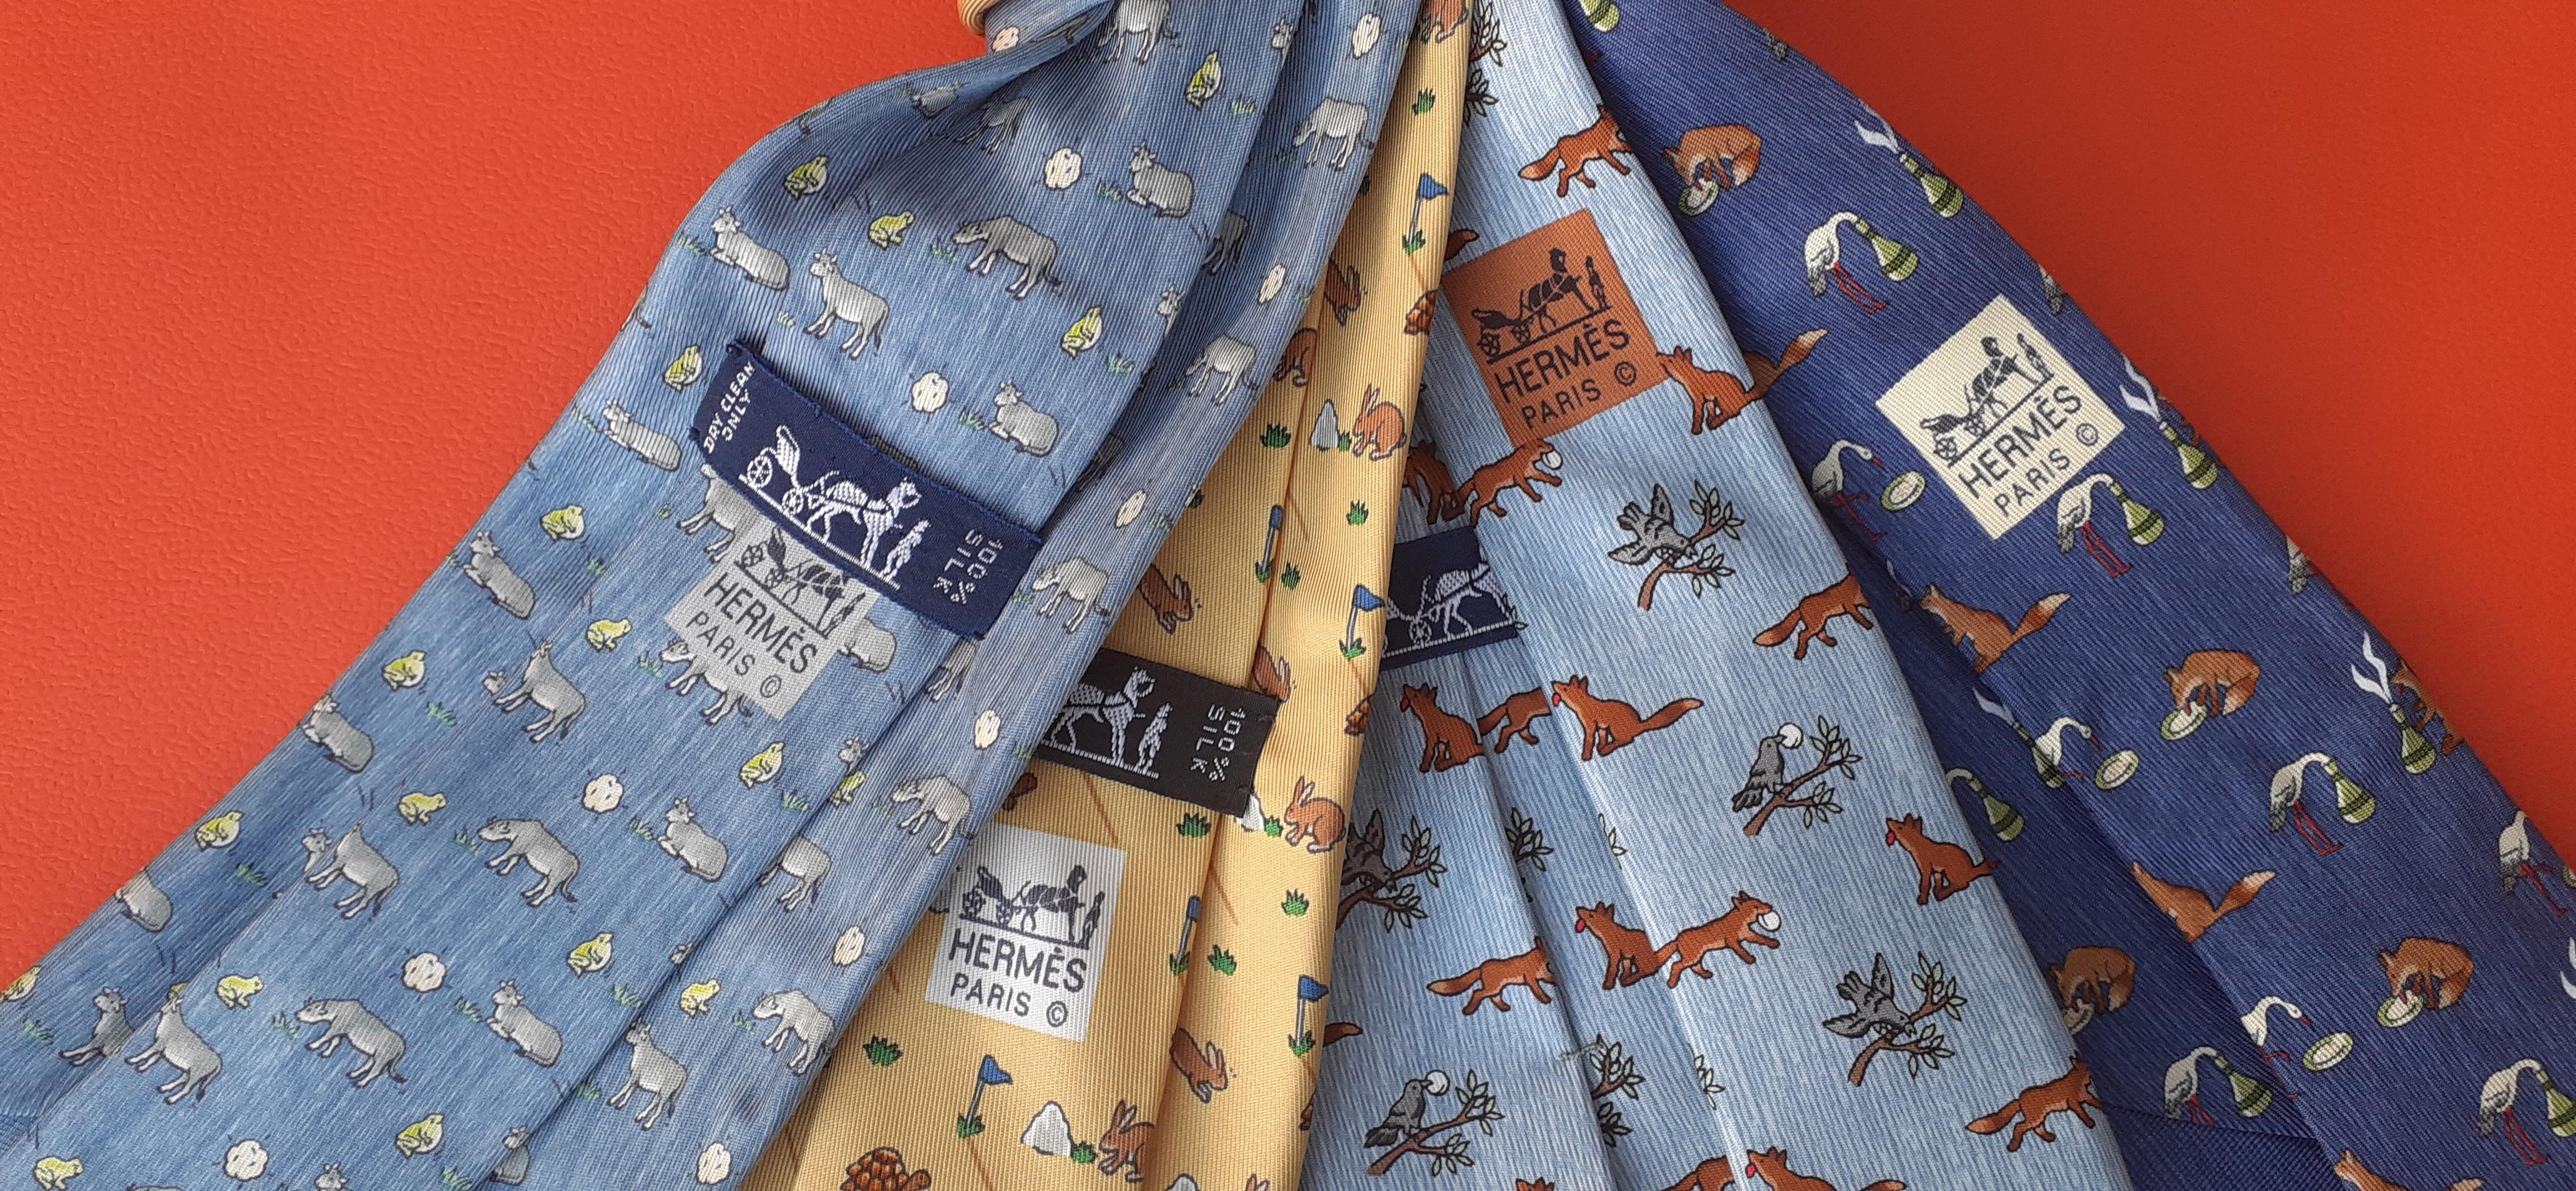 Exceptional Set of 4 Hermès Ties from The Fables of La Fontaine in Silk 6